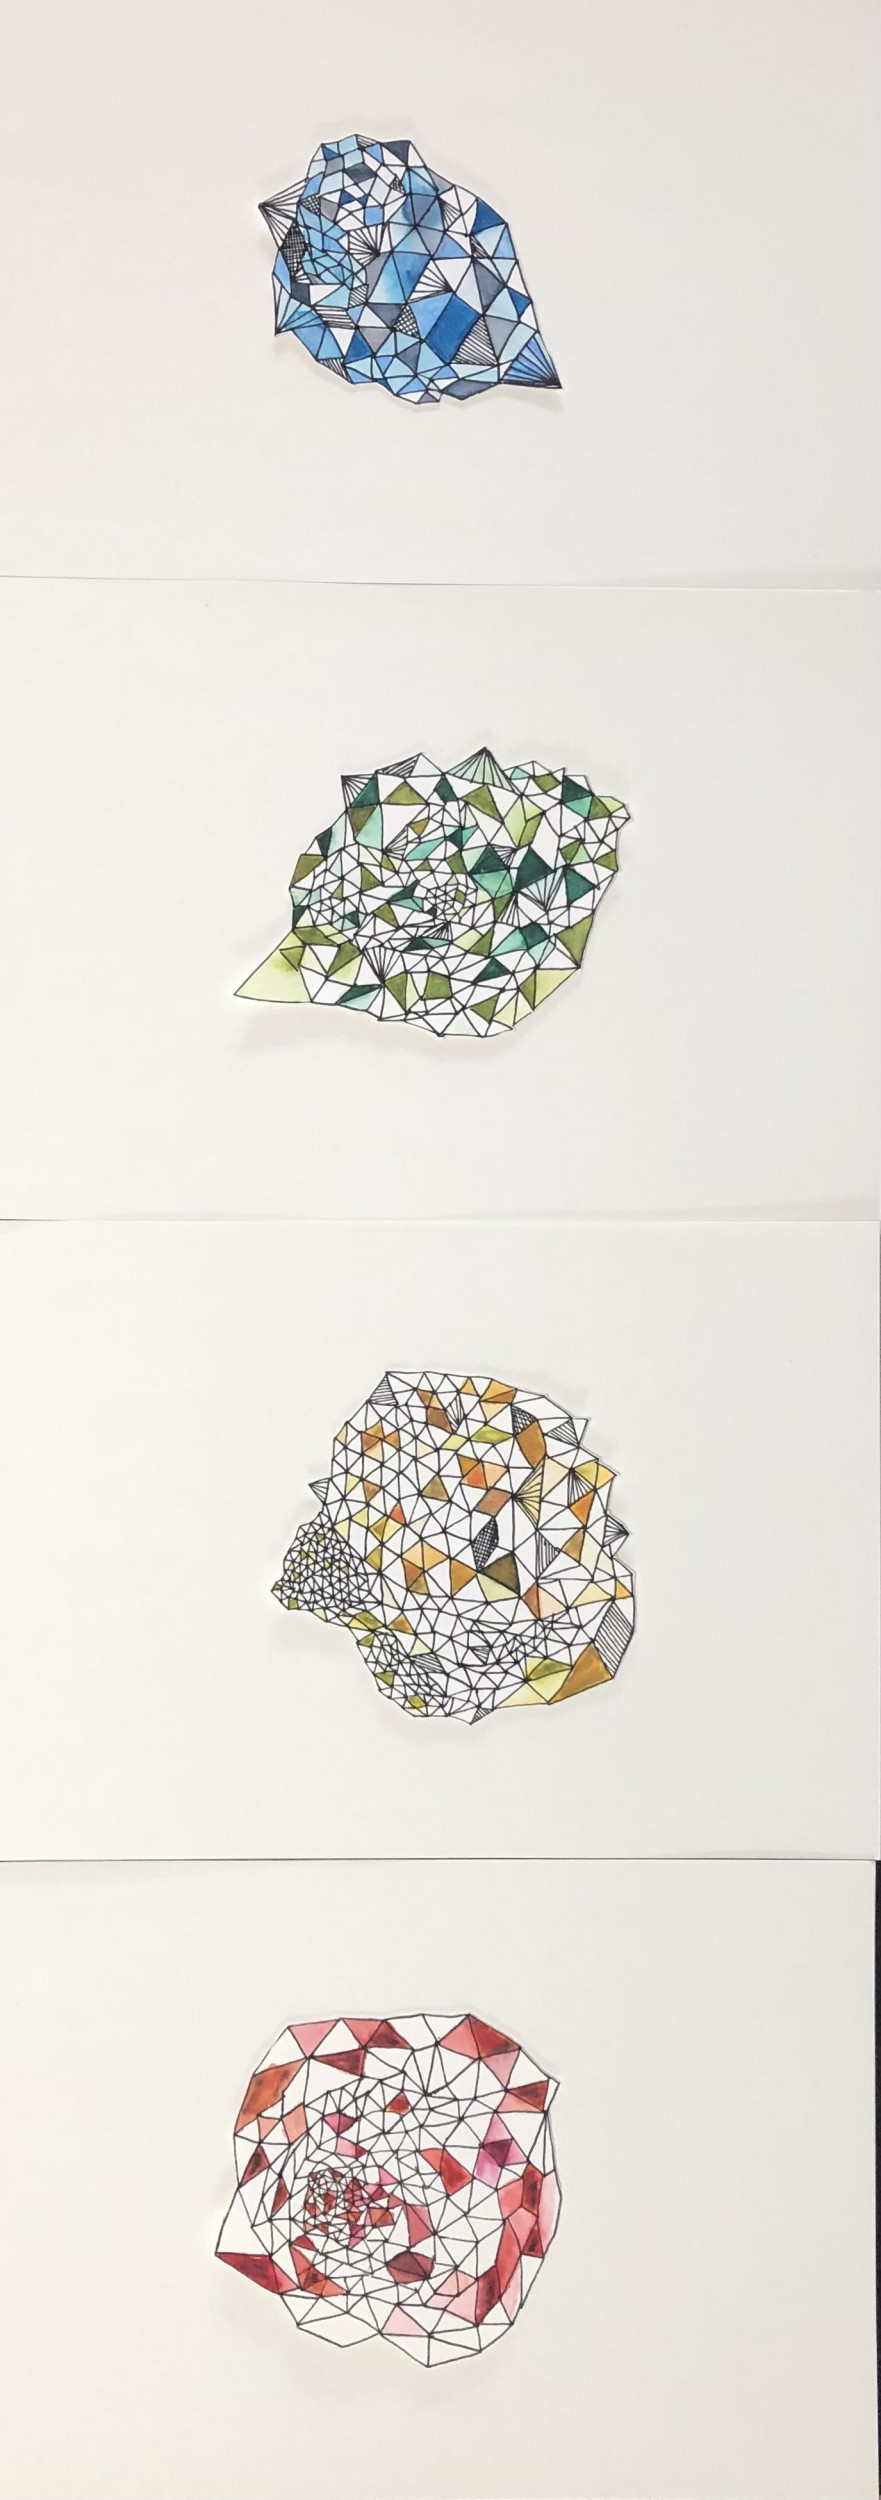 Mixed media drawings with repetitive patterns representing the four natural elements; Posca pen and watercolour, 84 x 118cm